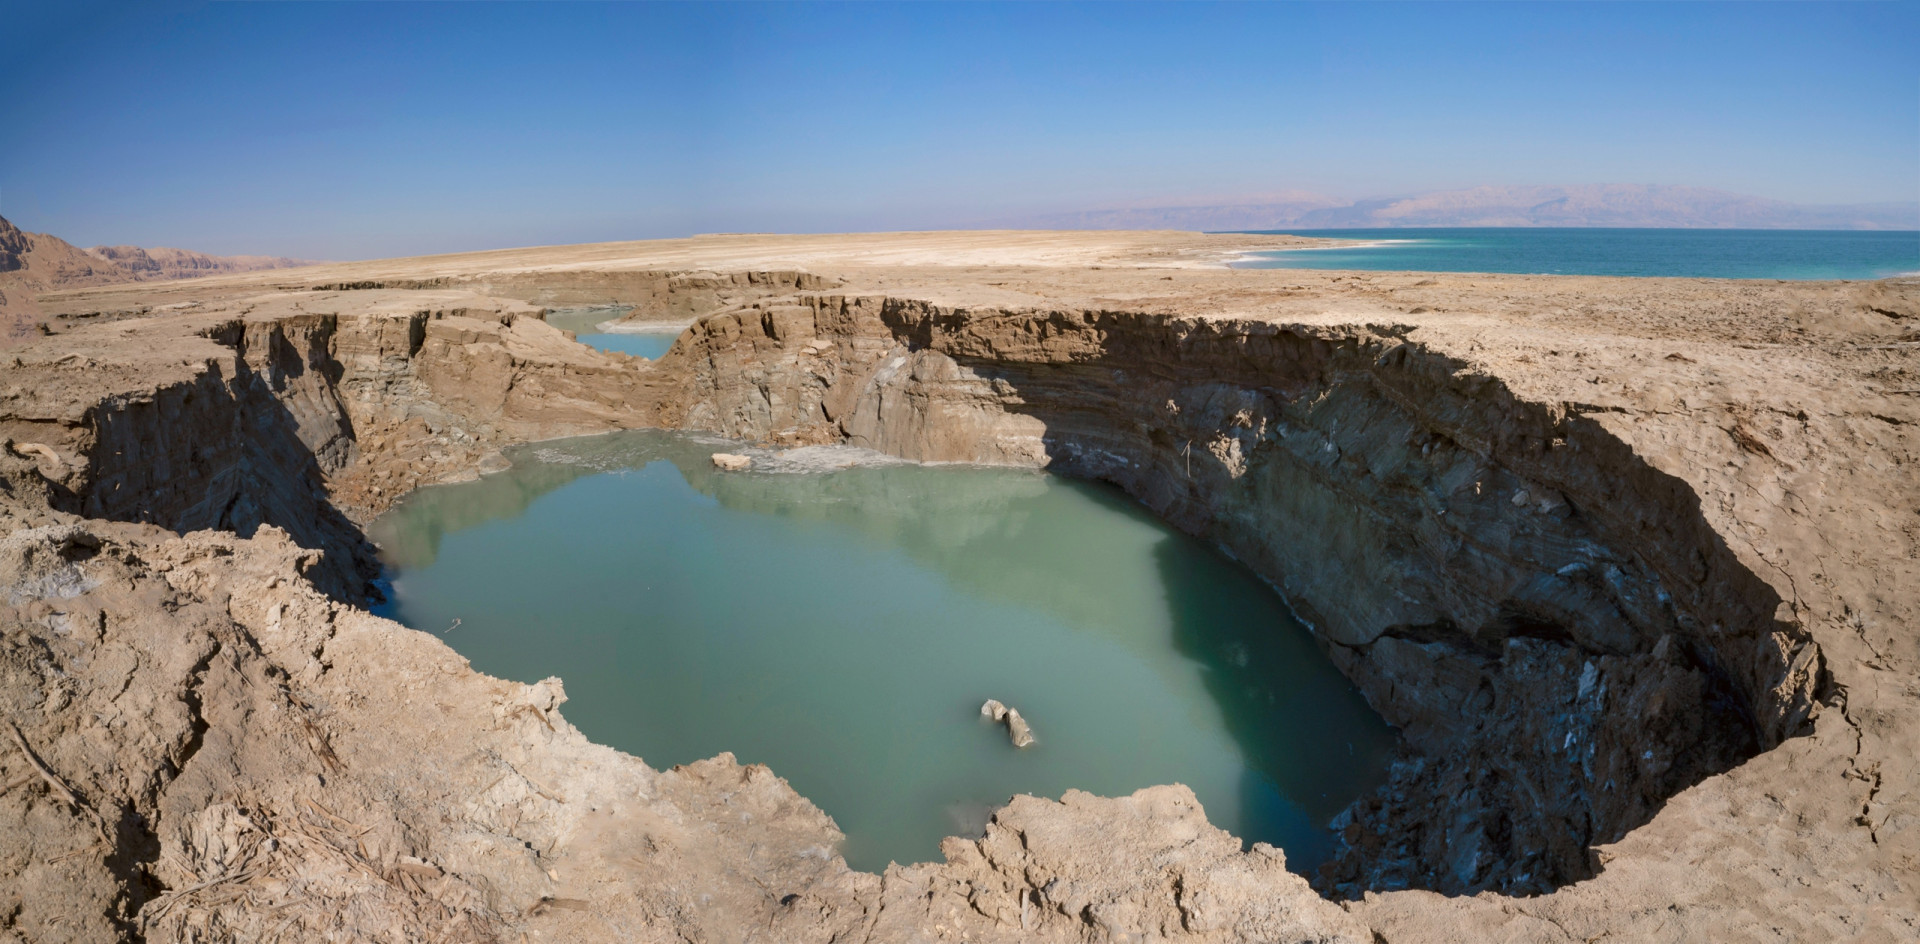 <p>The Dead Sea has a salinity of 34%. To put that percentage into perspective, Earth's oceans have an average salinity of 3.5%. The Dead Sea is therefore around 9.6 times as salty as any ocean.</p><p><a href="https://www.msn.com/en-us/community/channel/vid-7xx8mnucu55yw63we9va2gwr7uihbxwc68fxqp25x6tg4ftibpra?cvid=94631541bc0f4f89bfd59158d696ad7e">Follow us and access great exclusive content every day</a></p>